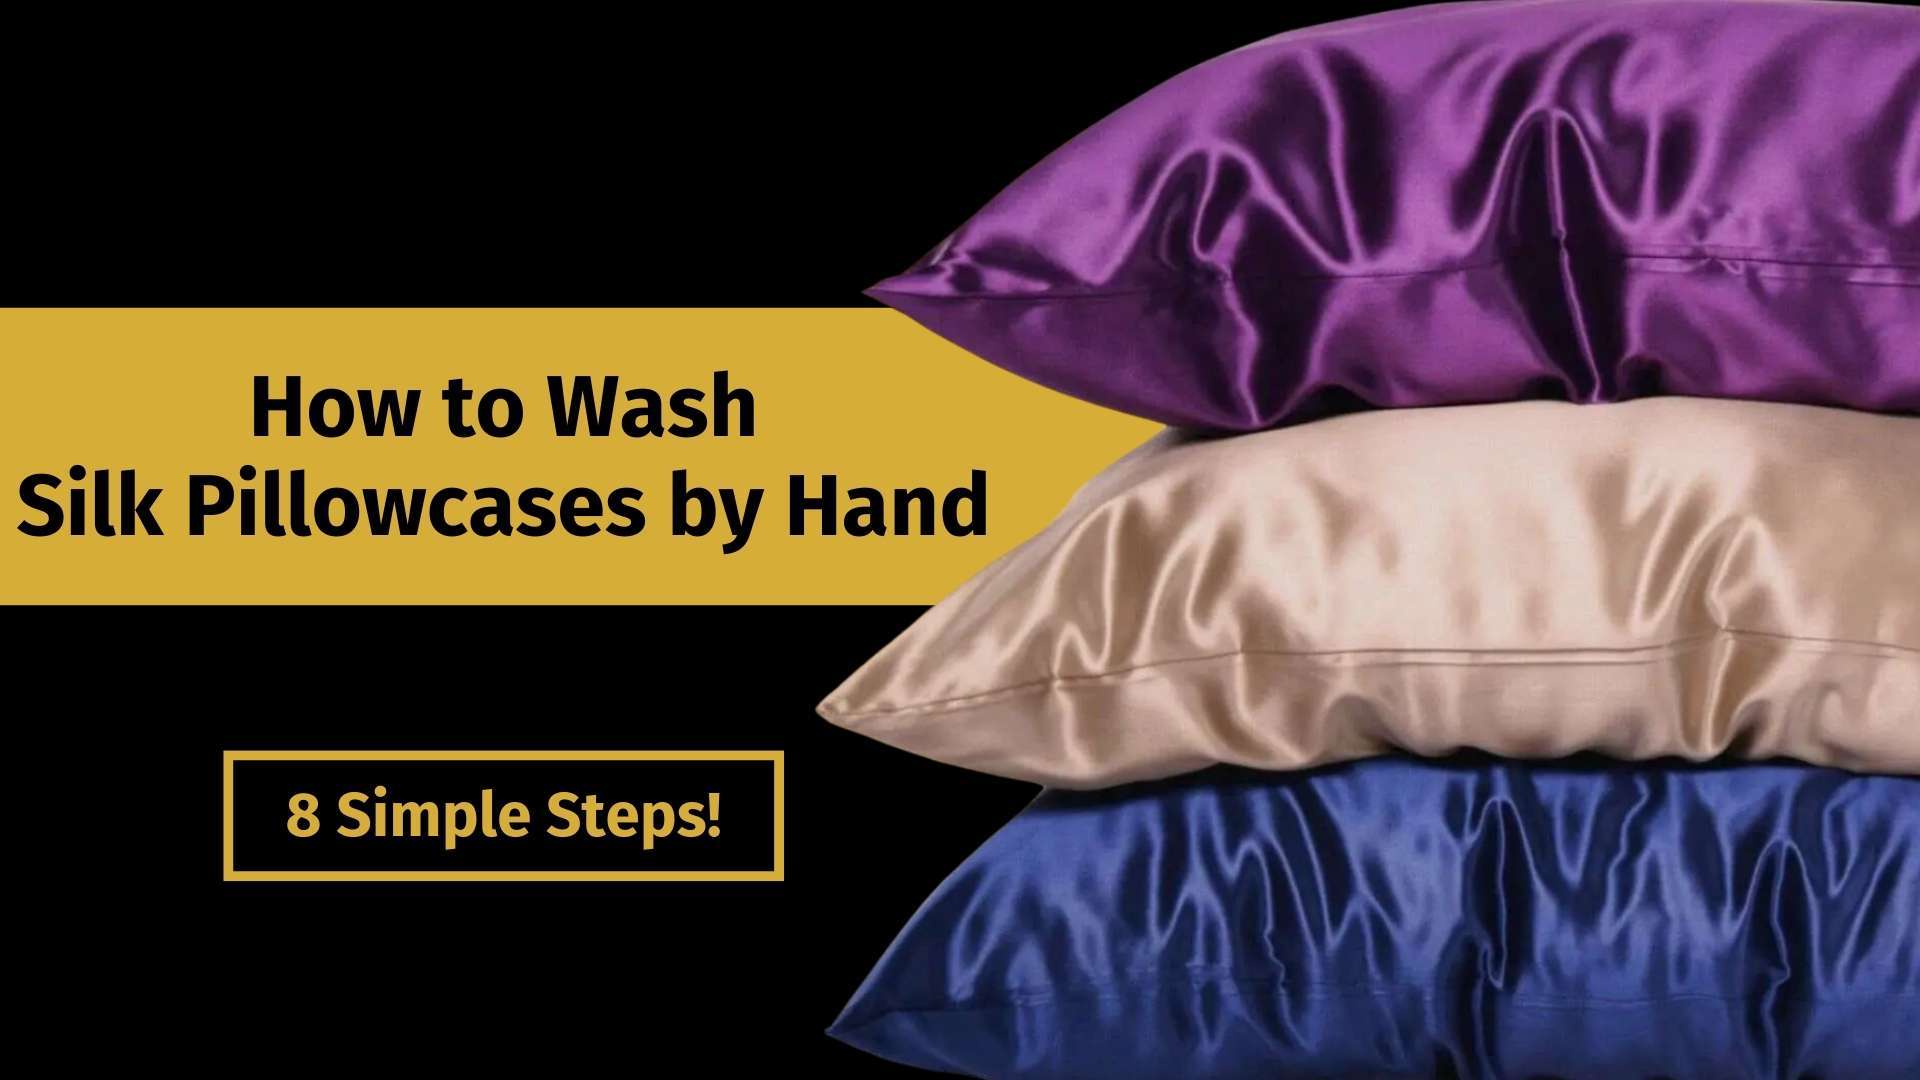 how to wash silk pillowcases by hand banner image with a purple, gold, and blue silk pillowcase stacked on top of each other